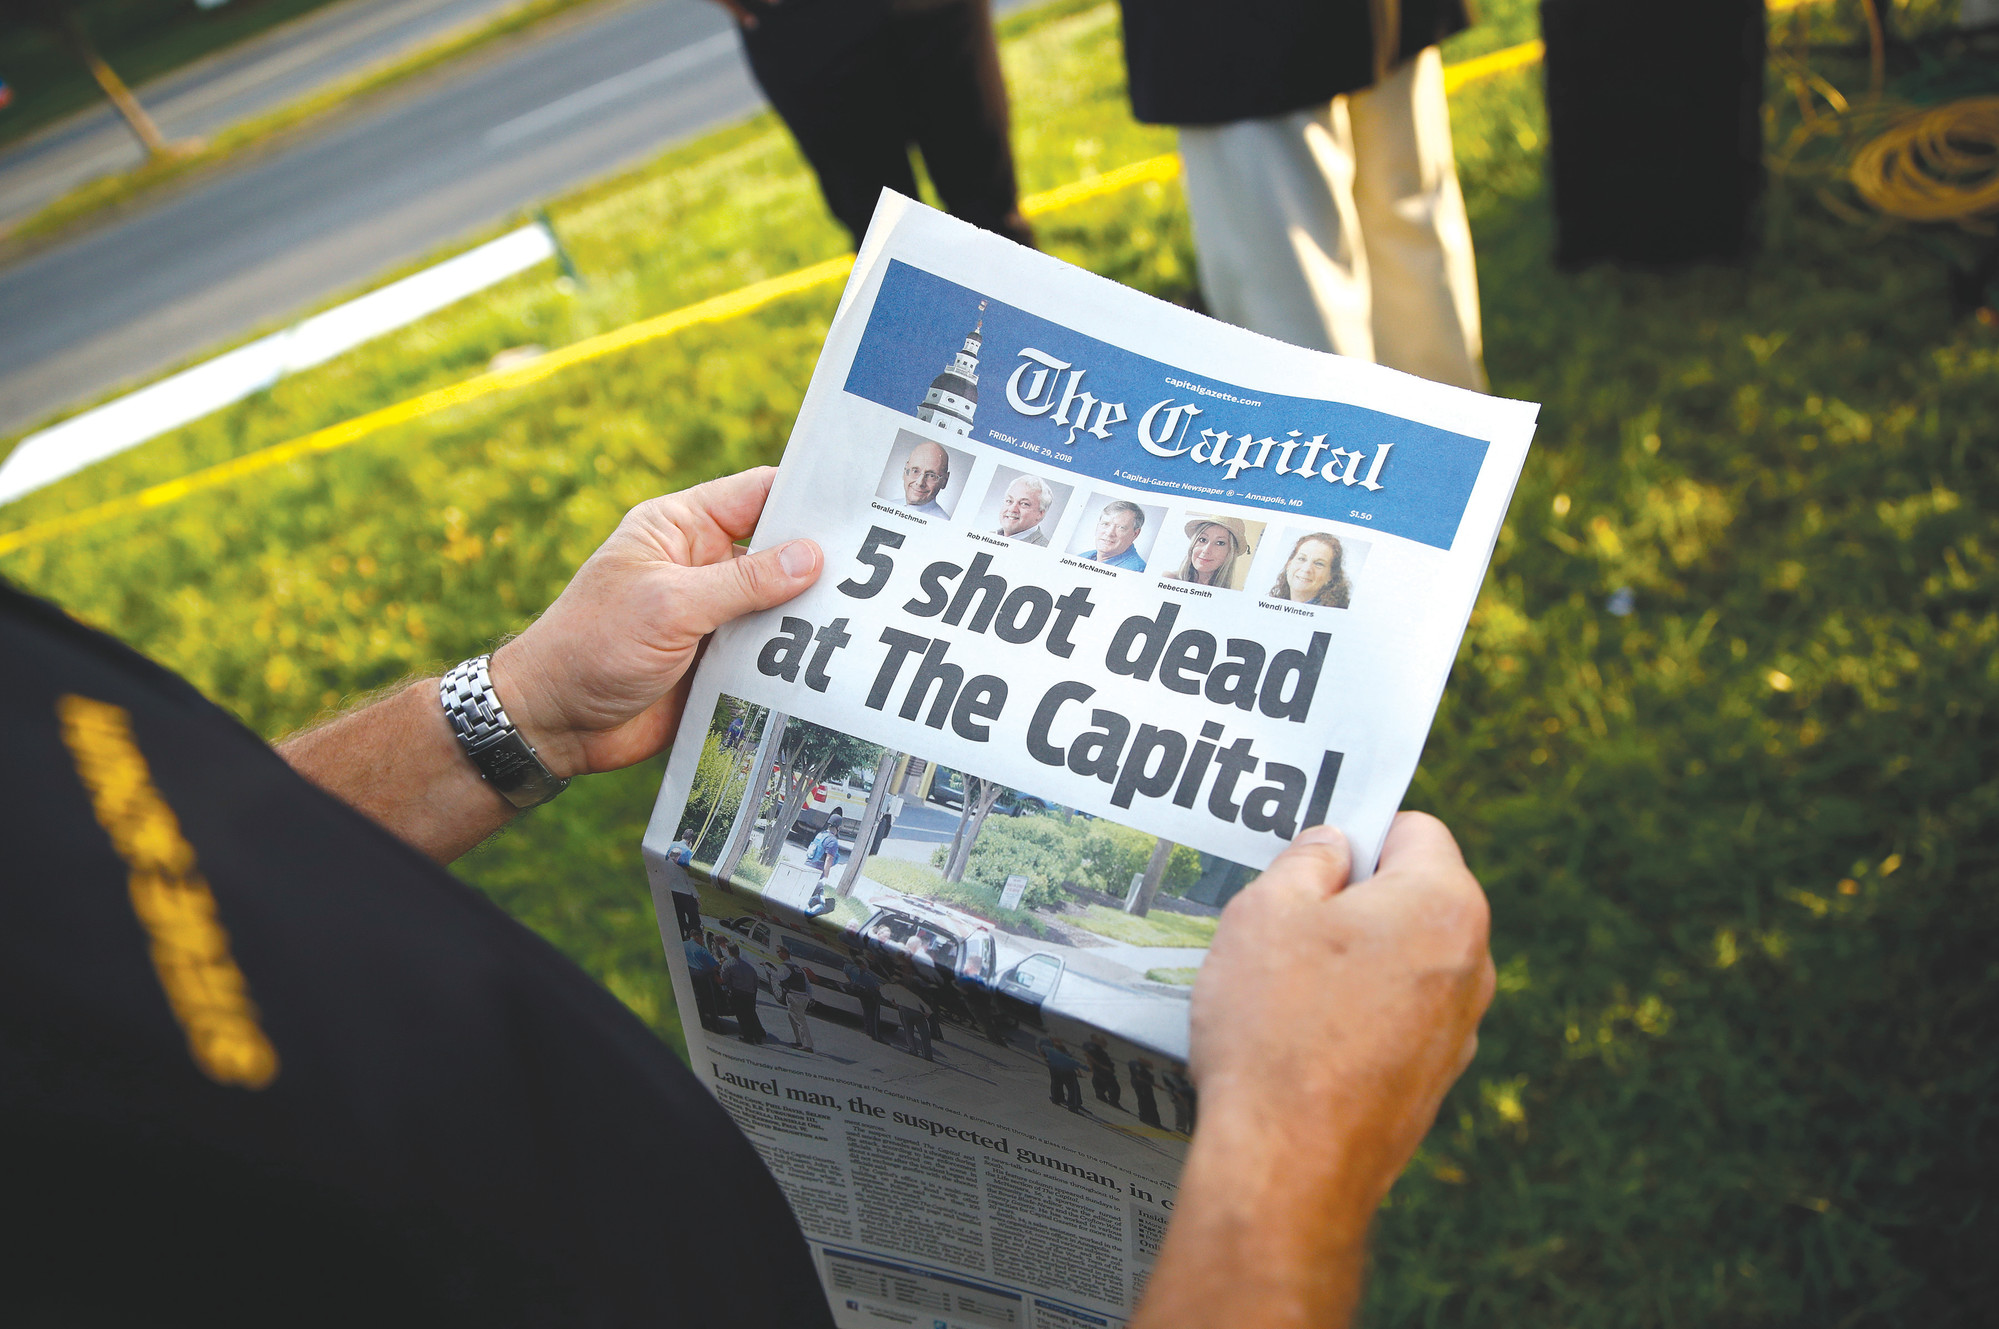 Steve Schuh, county executive of Anne Arundel County, holds a copy of The Capital Gazette near the scene of a shooting at the newspaper's office Friday in Annapolis, Maryland. A man armed with smoke grenades and a shotgun attacked journalists in the building Thursday, killing several people before police quickly stormed the building and arrested him, police and witnesses said.